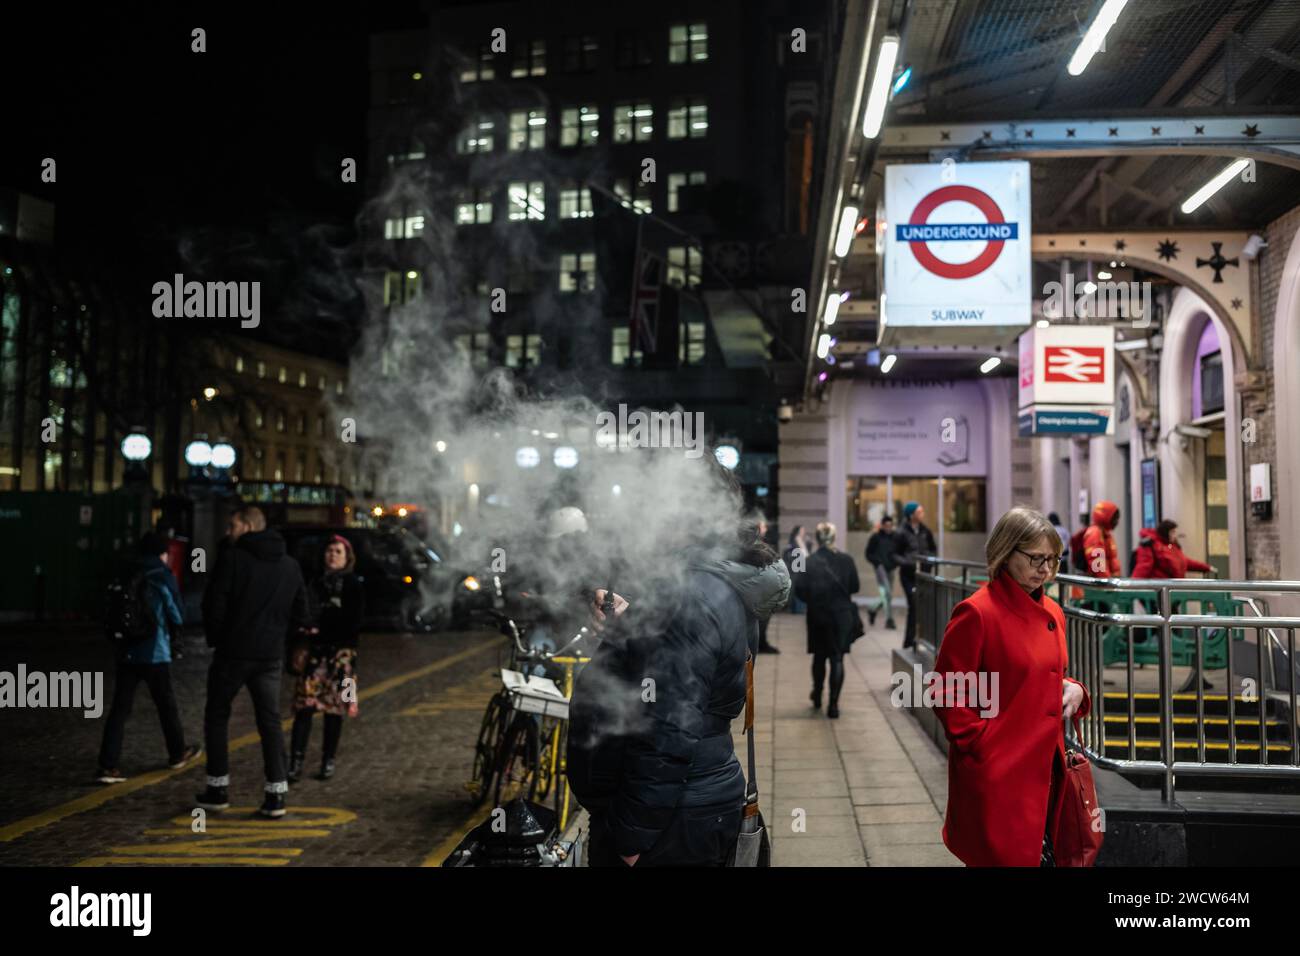 A puff of vape smoke floats in the winter night air outside Charing Cross Station, in London's West End, England, United Kingdom Stock Photo